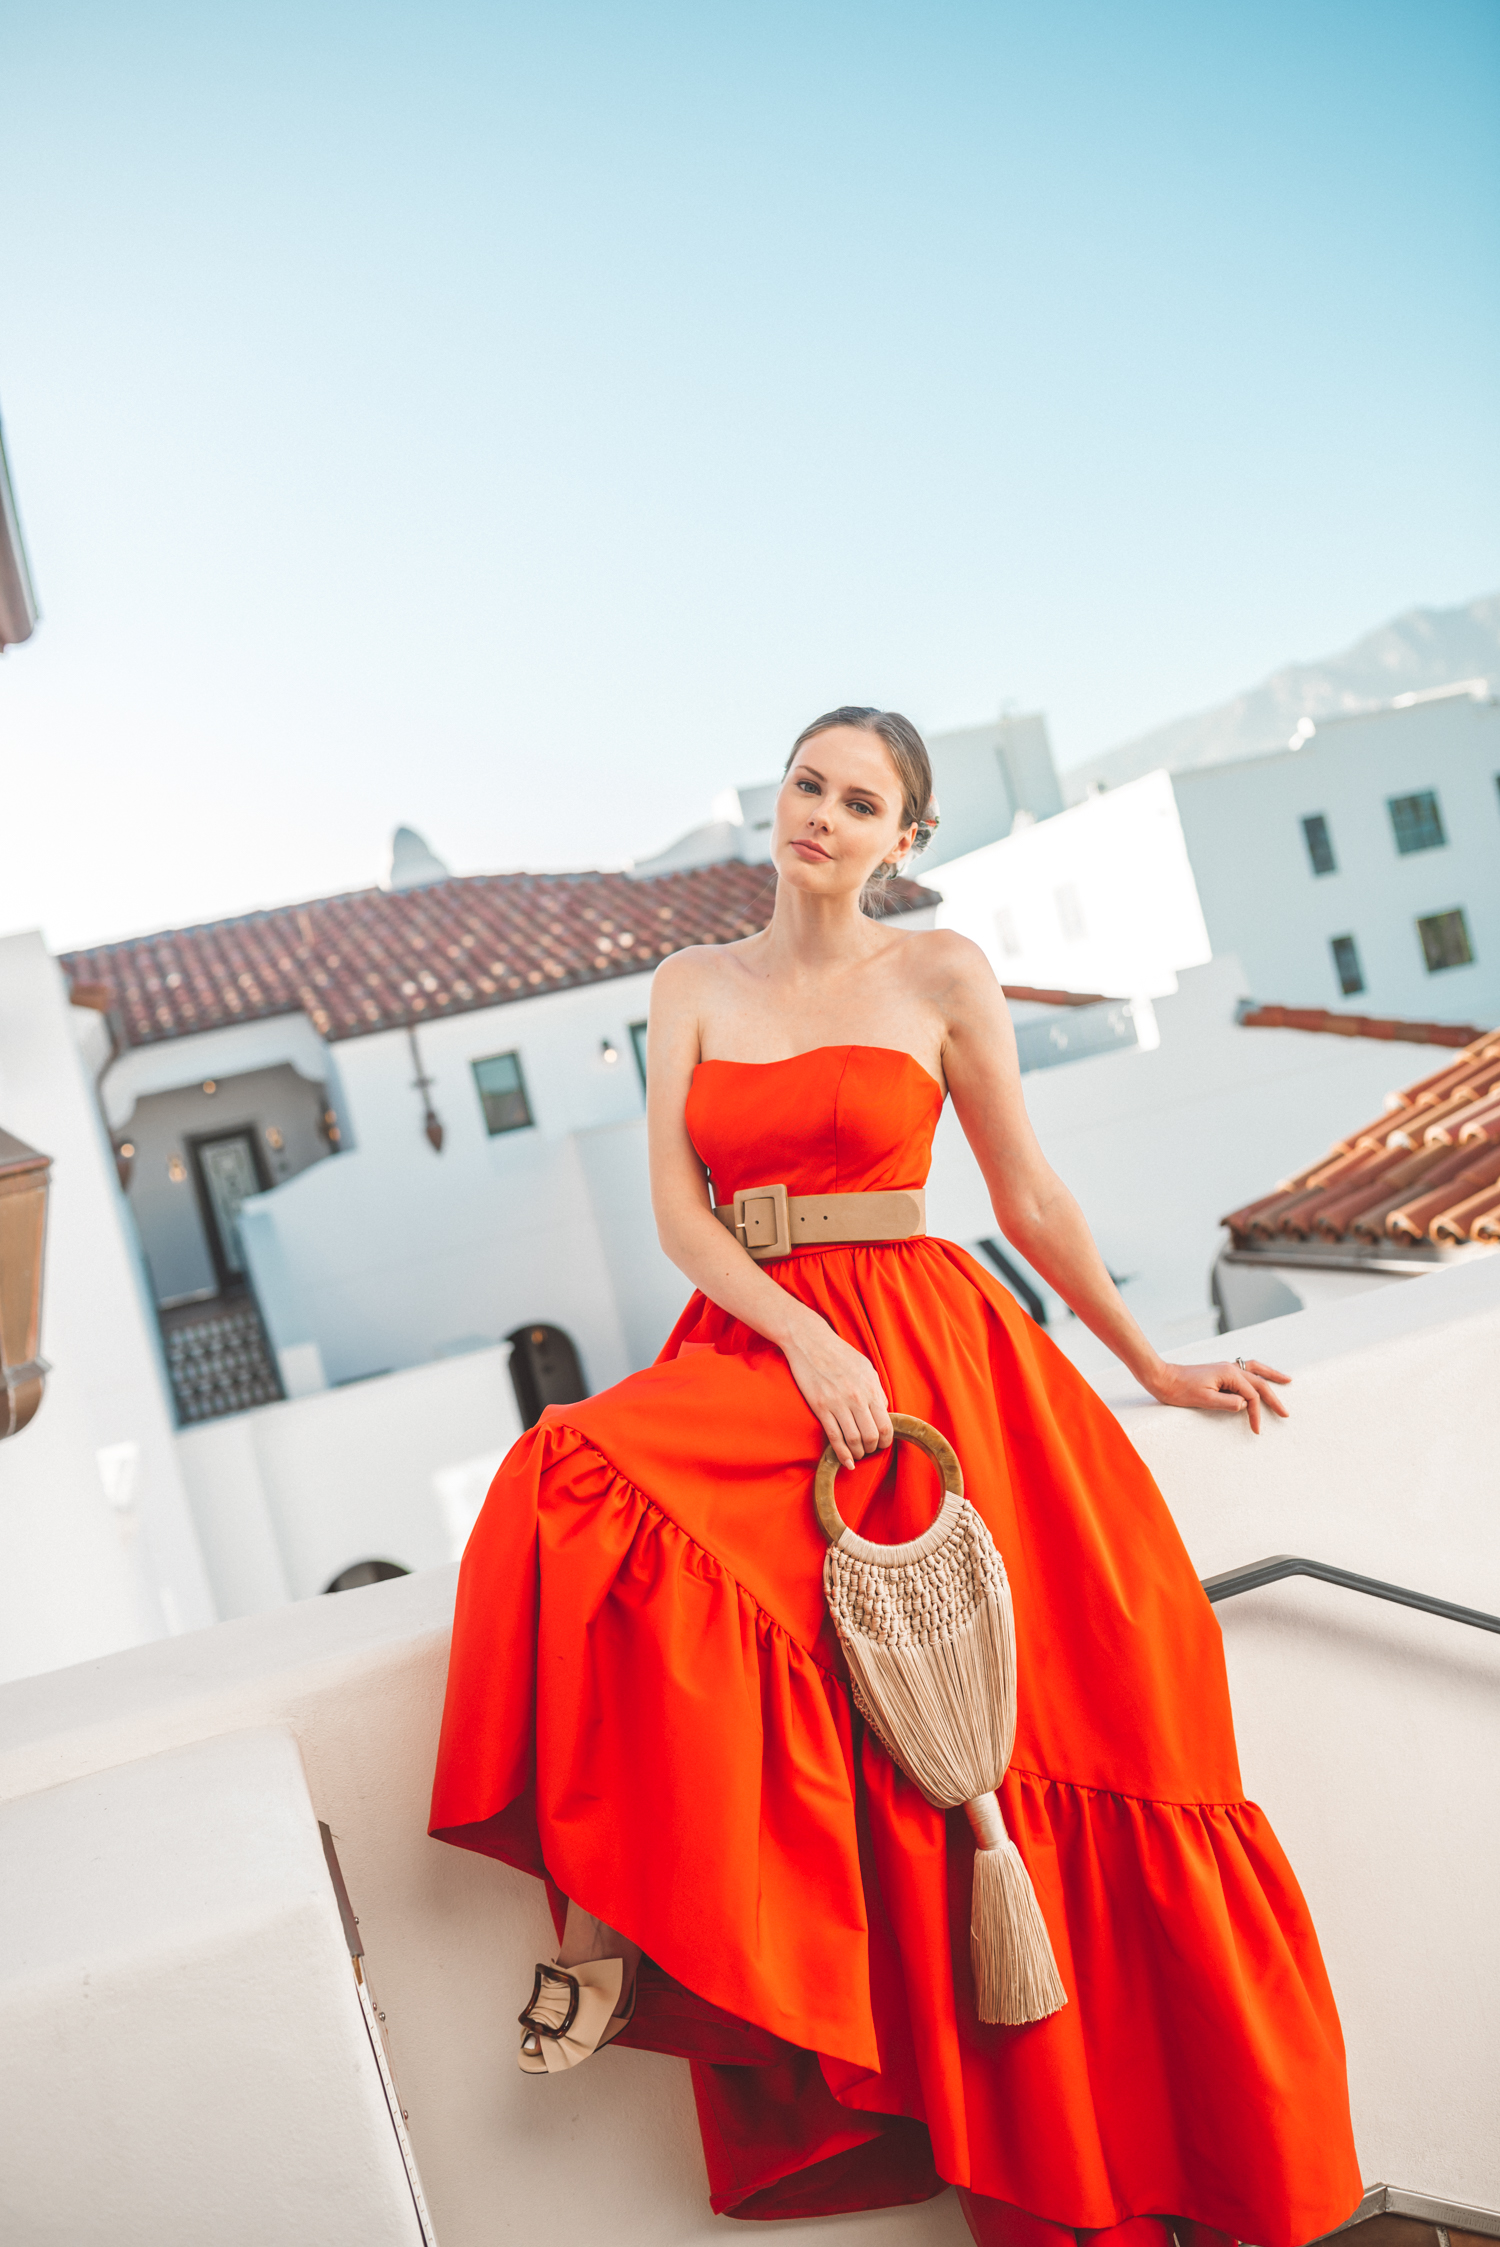 Alyssa Campanella of The A List blog visits Hotel Californian in Santa Barbara with Torrance Coombs wearing Mestiza NY Georgiana dress and Cult Gaia Angelou bag for an anniversary trip.